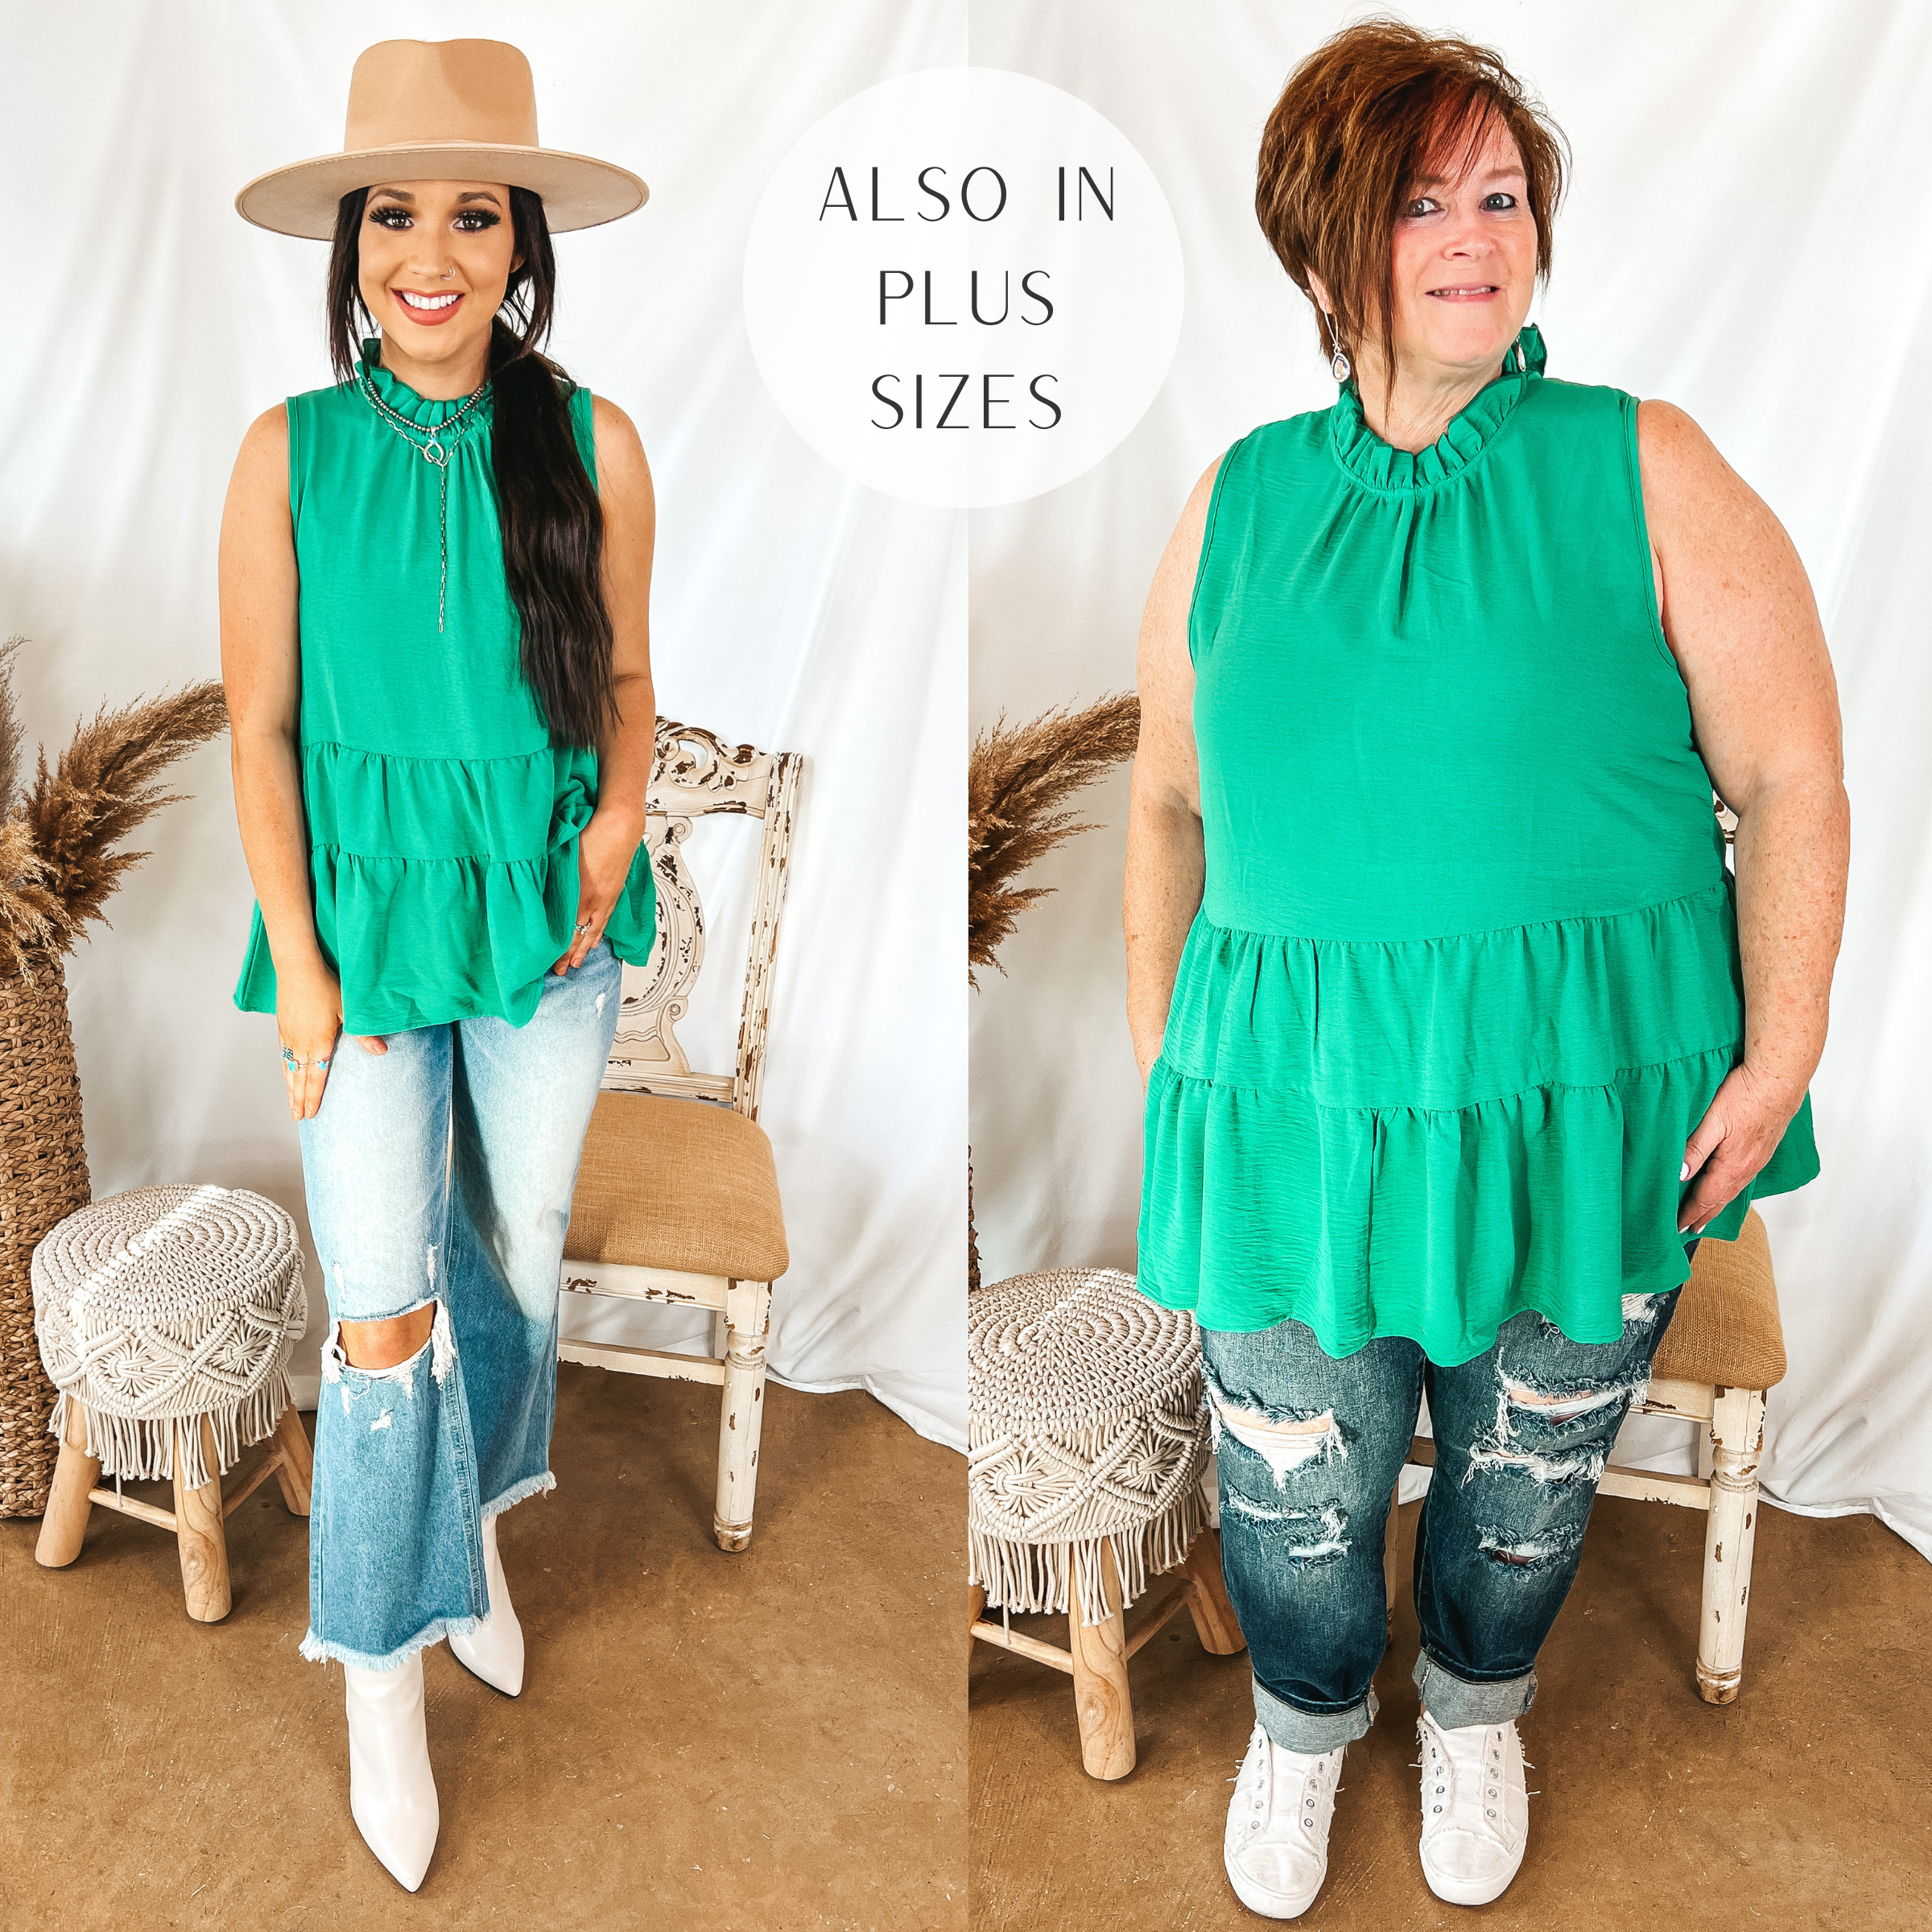 Models are wearing a green high neck tank top that has a tiered body. Size small model has it paired with cropped jeans, white booties, and a tan hat. Plus size model has it paired with distressed jeans, white sneakers, and silver jewelry.